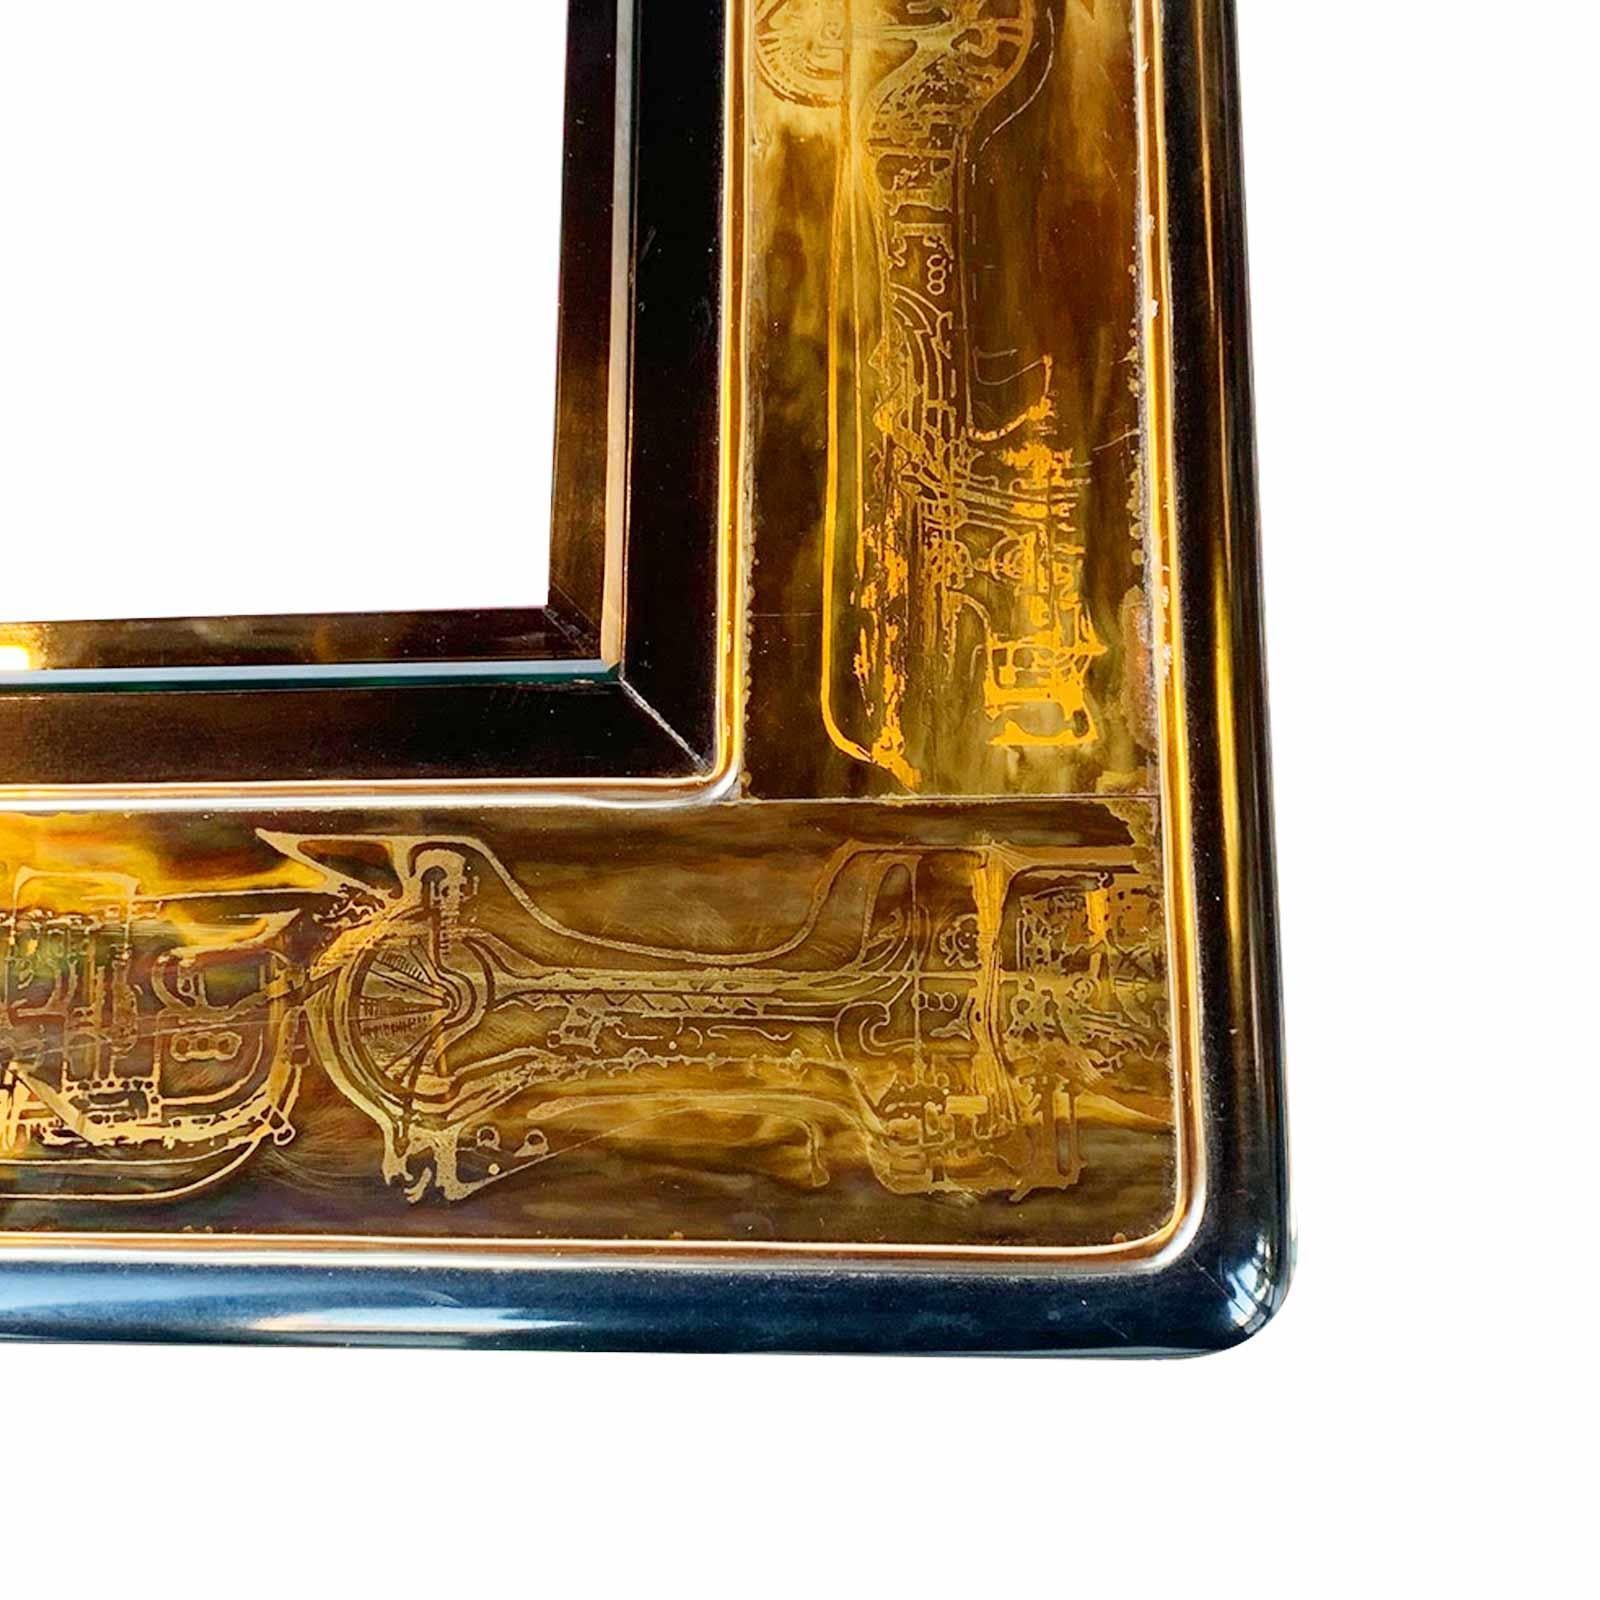 Dining table brass acid etched by Bernhard Rohne for Mastercraft 1970s.